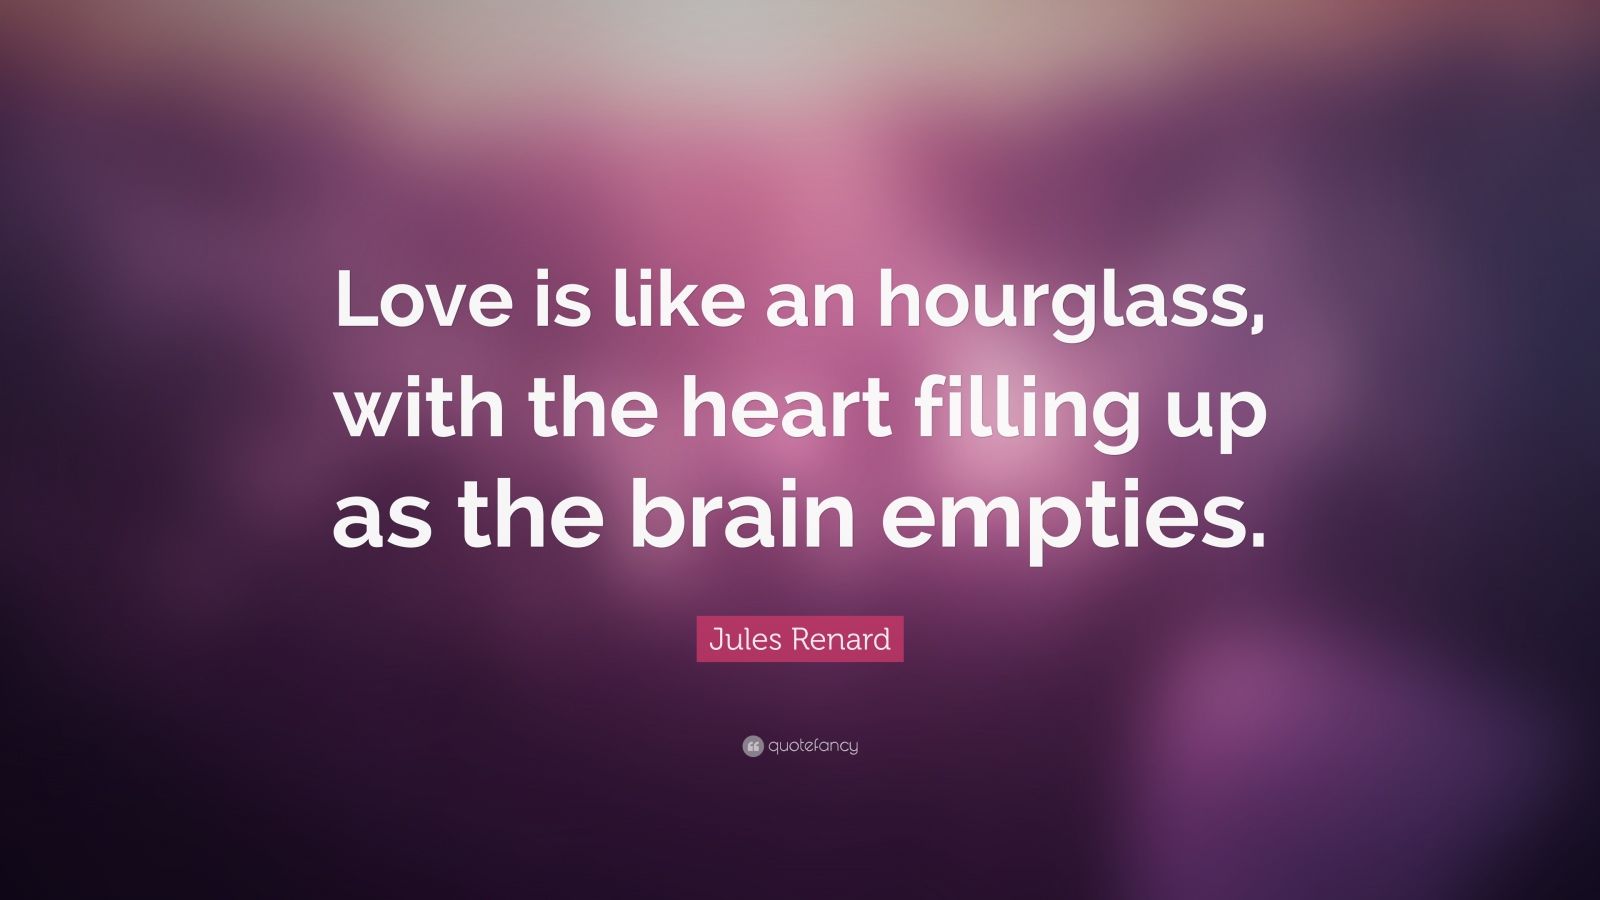 Jules Renard Quote: “Love is like an hourglass, with the heart filling ...